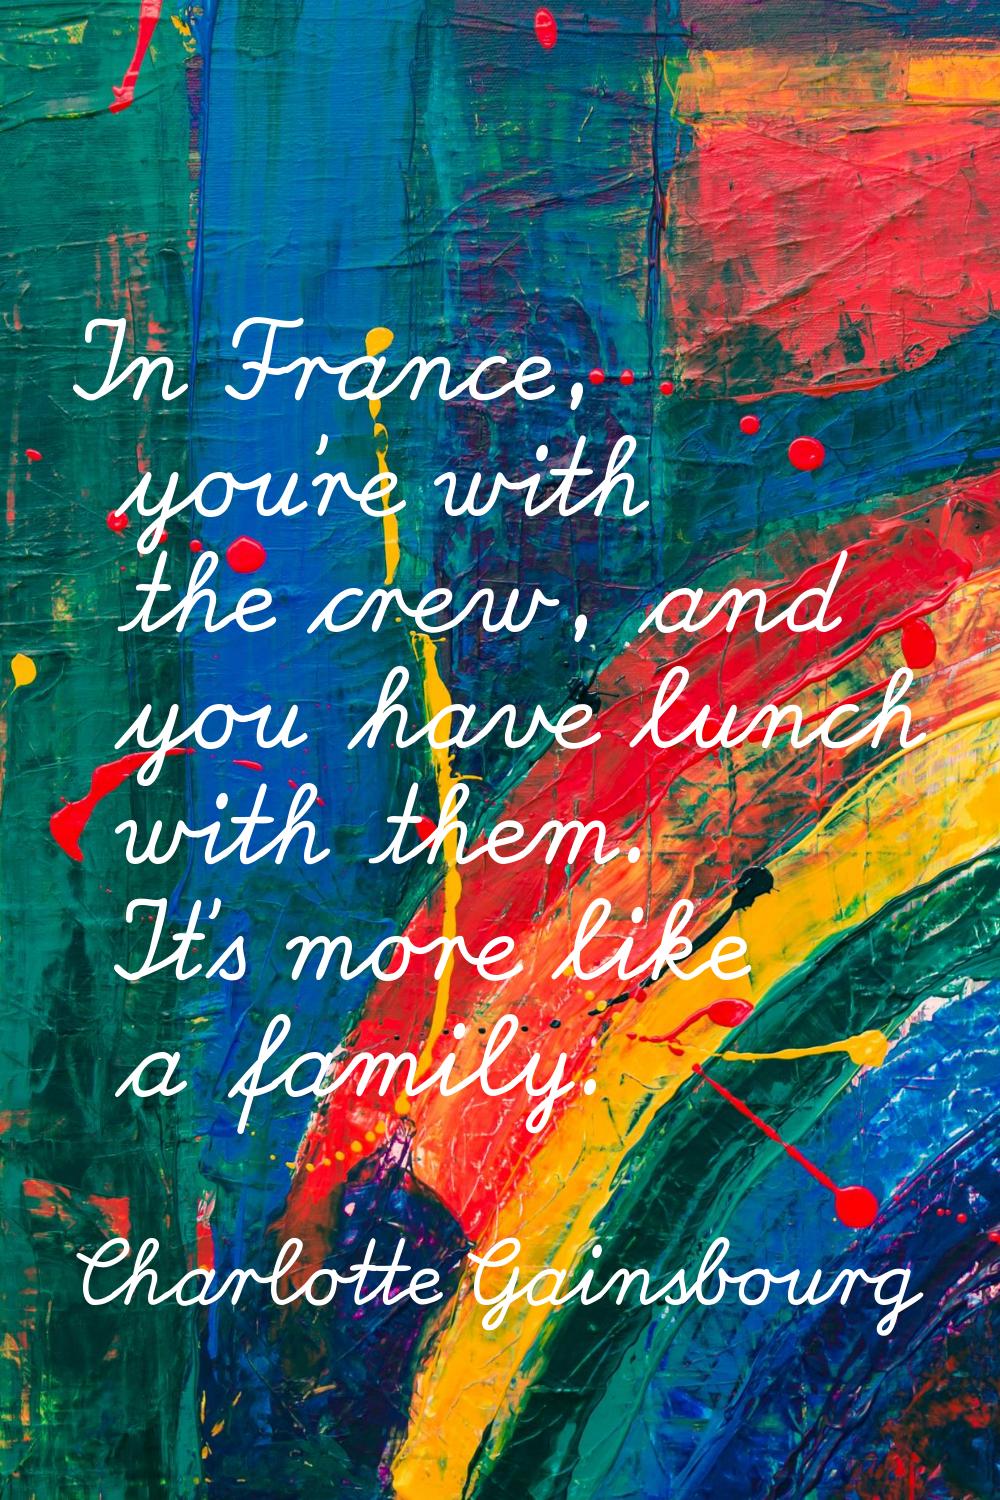 In France, you're with the crew, and you have lunch with them. It's more like a family.